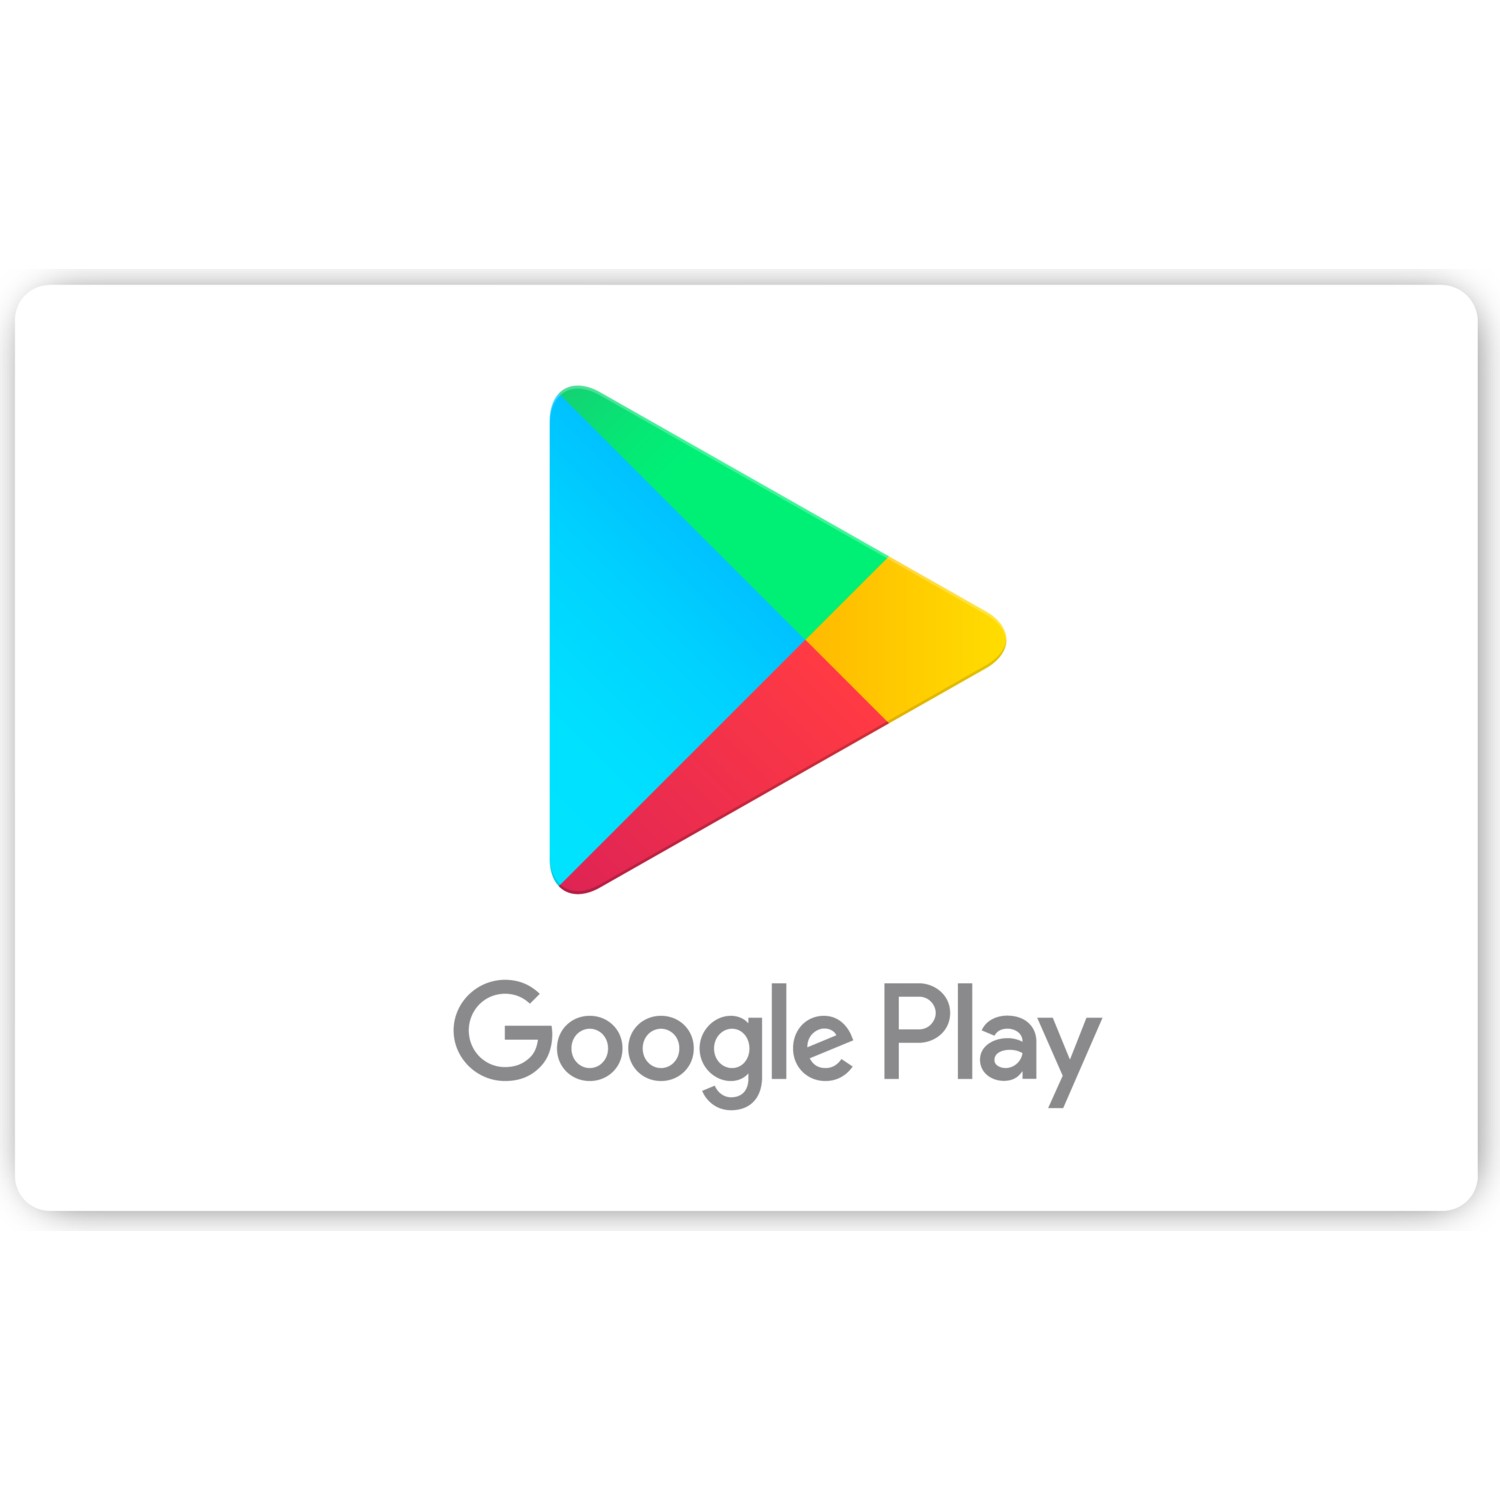 Where to buy Google Play gift cards - Google Play Help